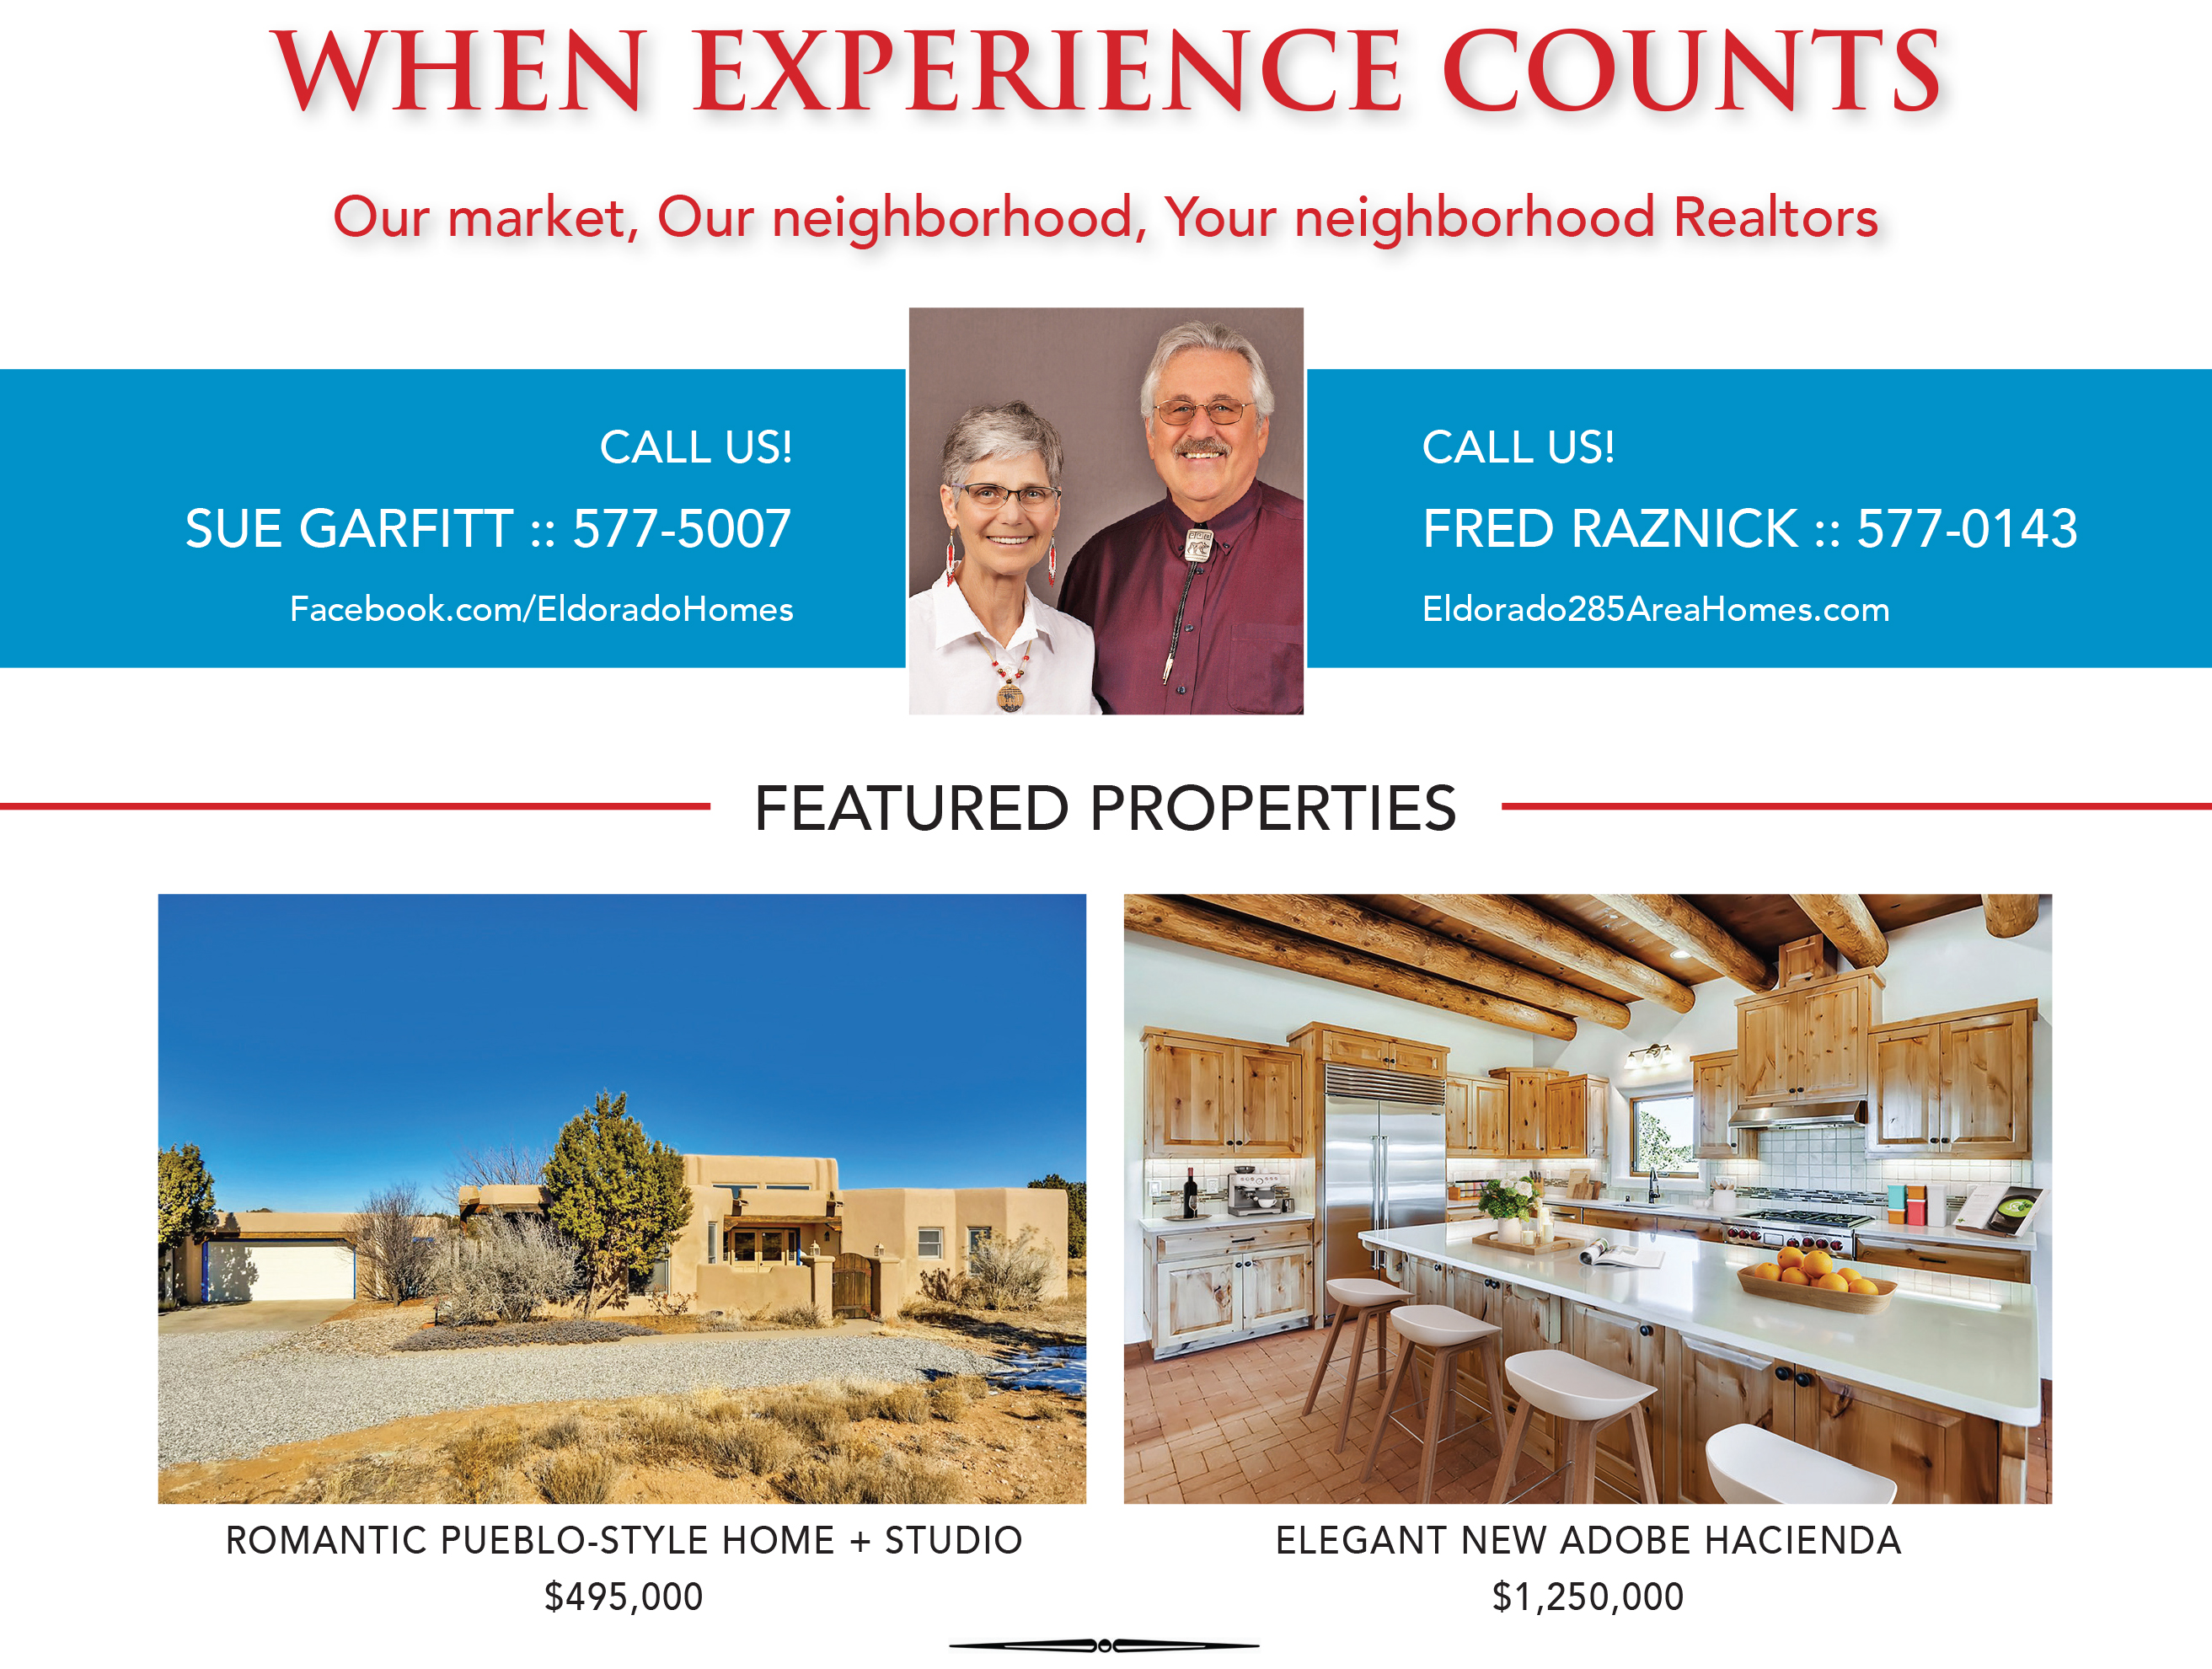 Did you see our ad in the February issue of Eldorado Living? 